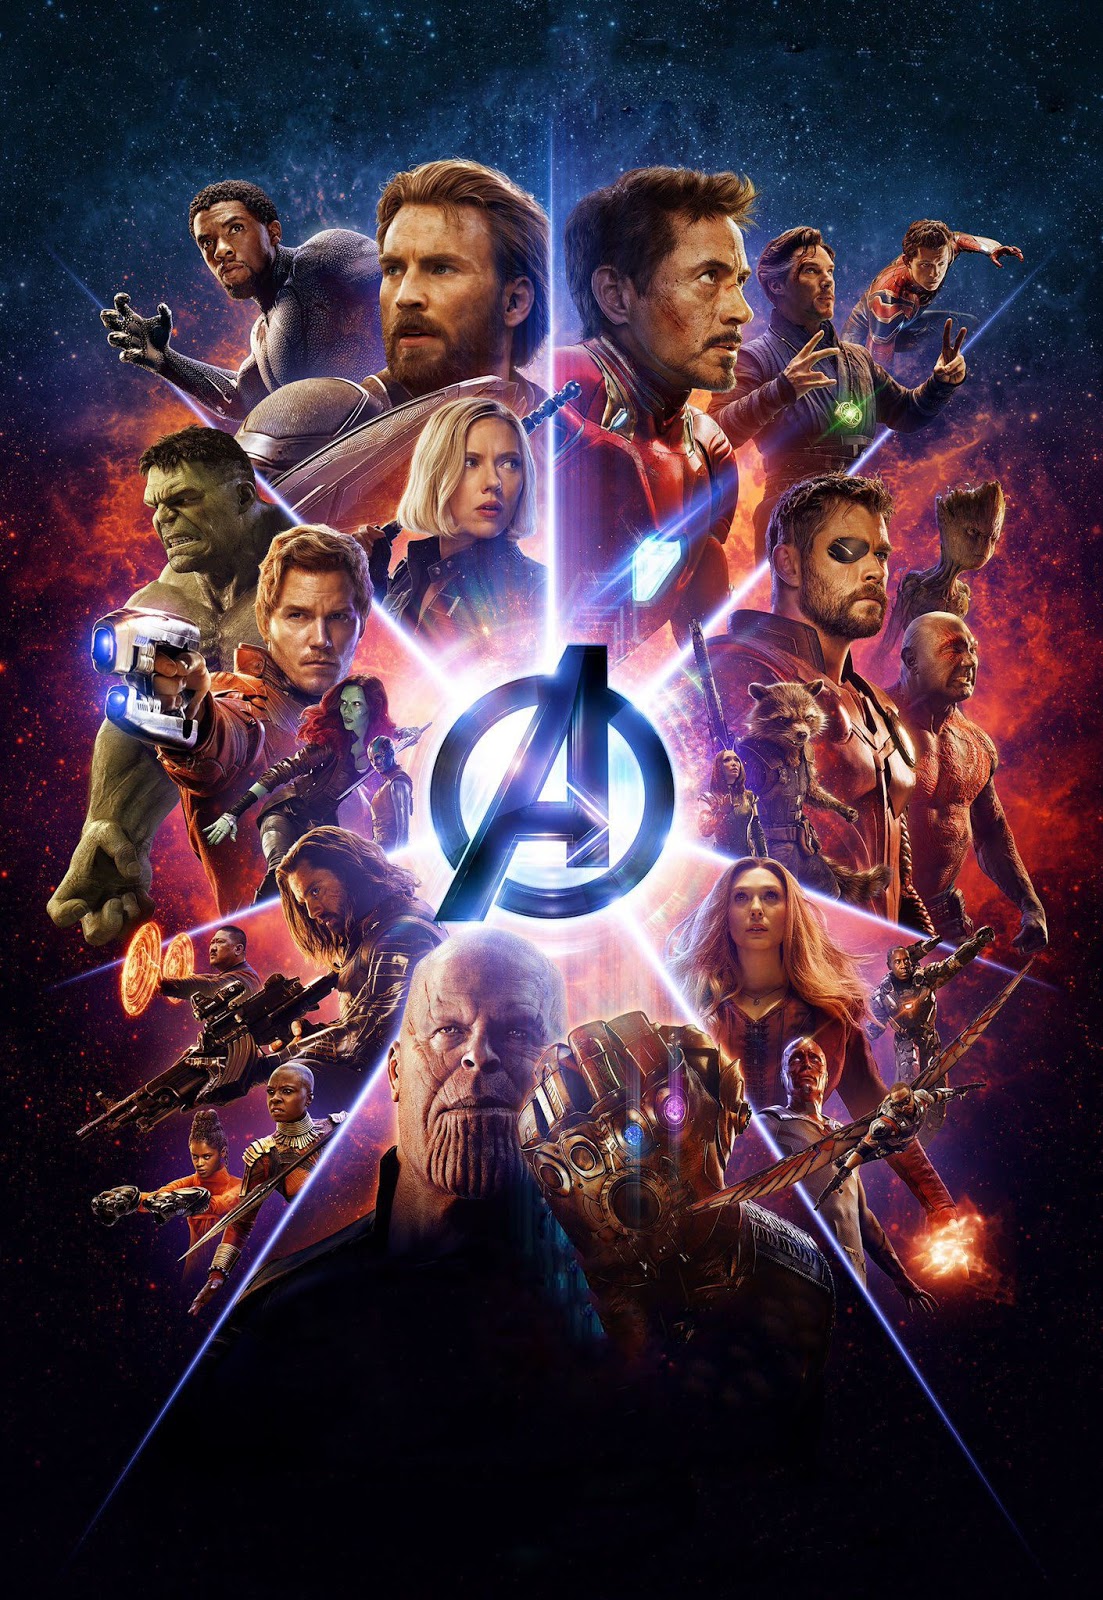 Avengers End Game And Infinity War HD Wallpaper In 4k